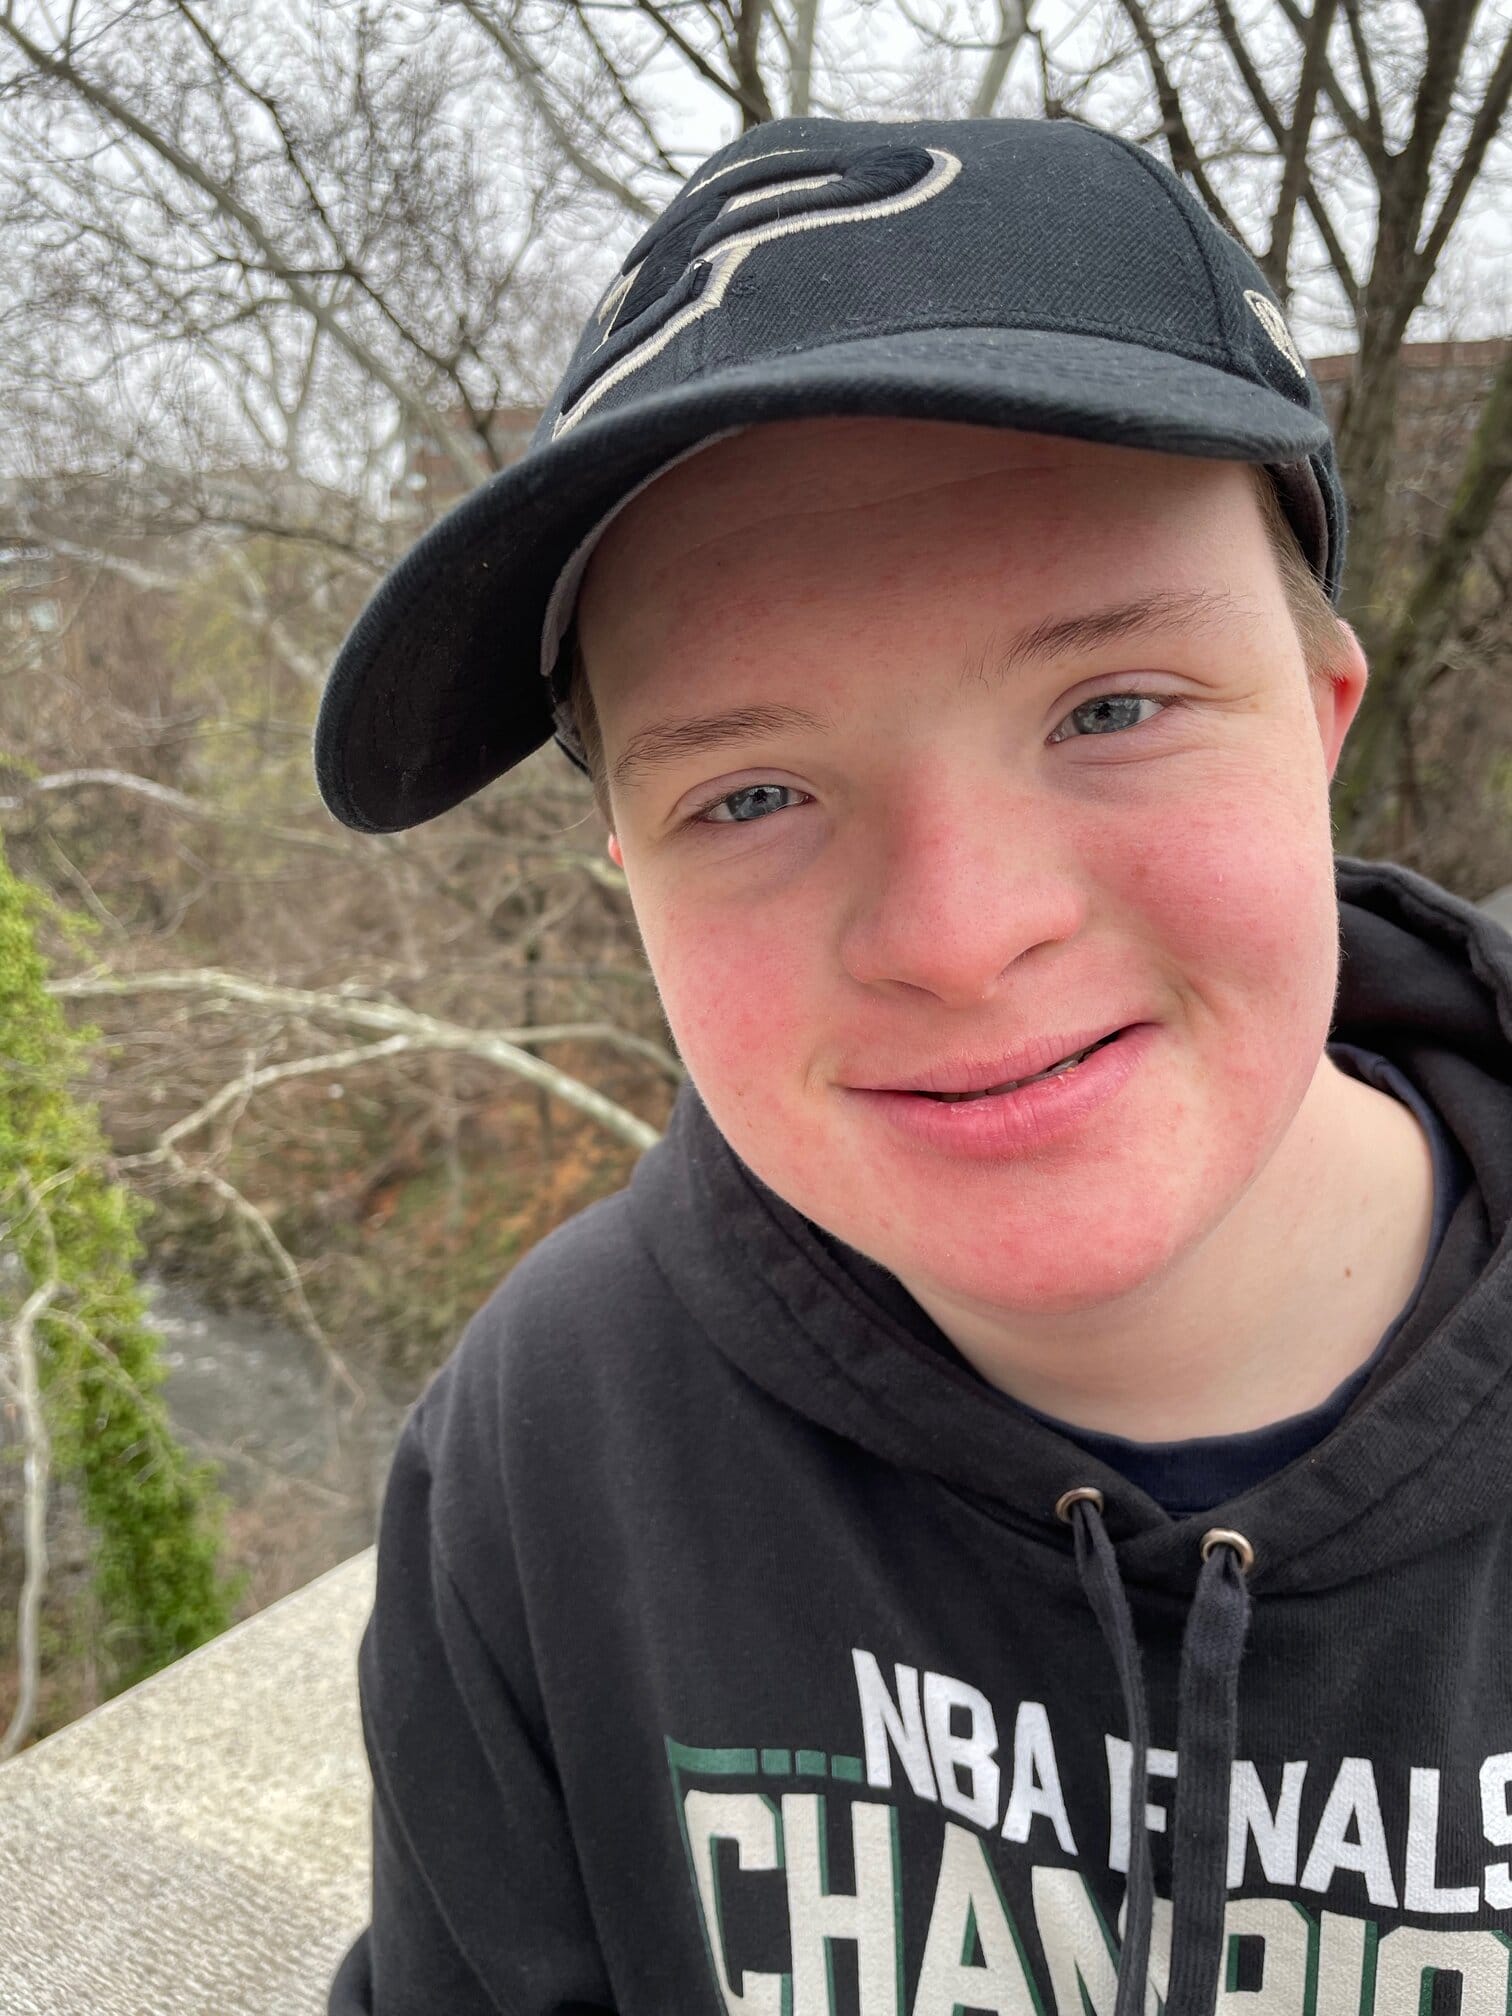 Jake is a teen with Down syndrome. Jake is seen here wearing is favorite team hat - Purdue University!